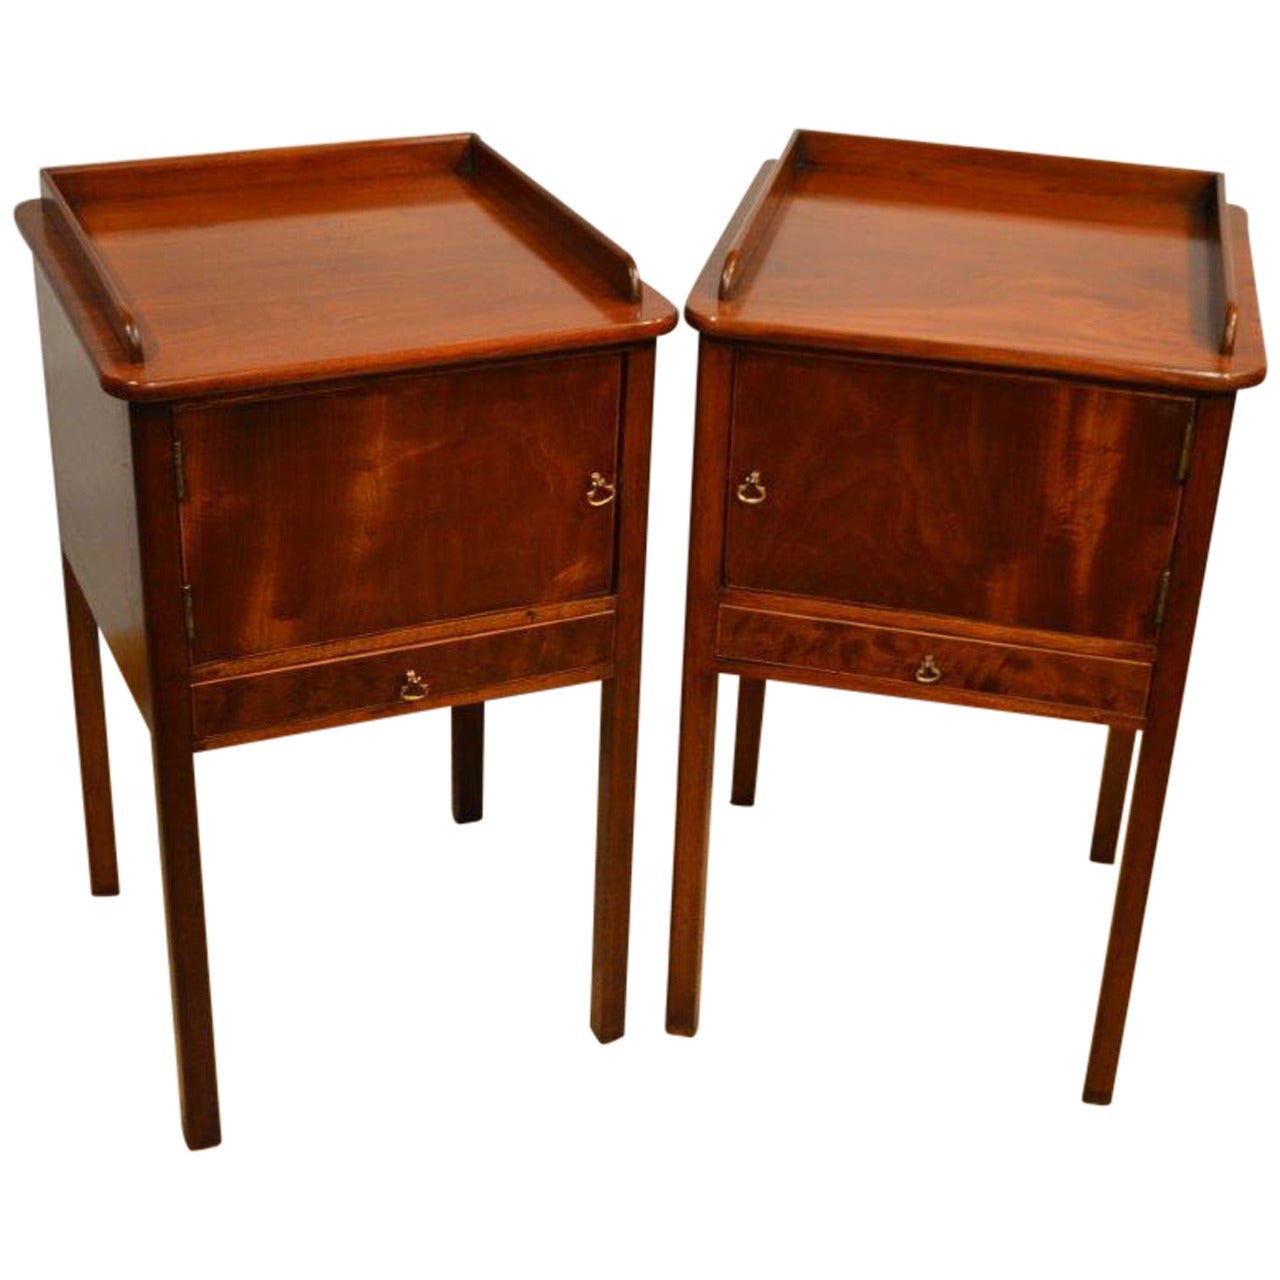 Pair of Mahogany George III Style Antique Bedside Cabinets